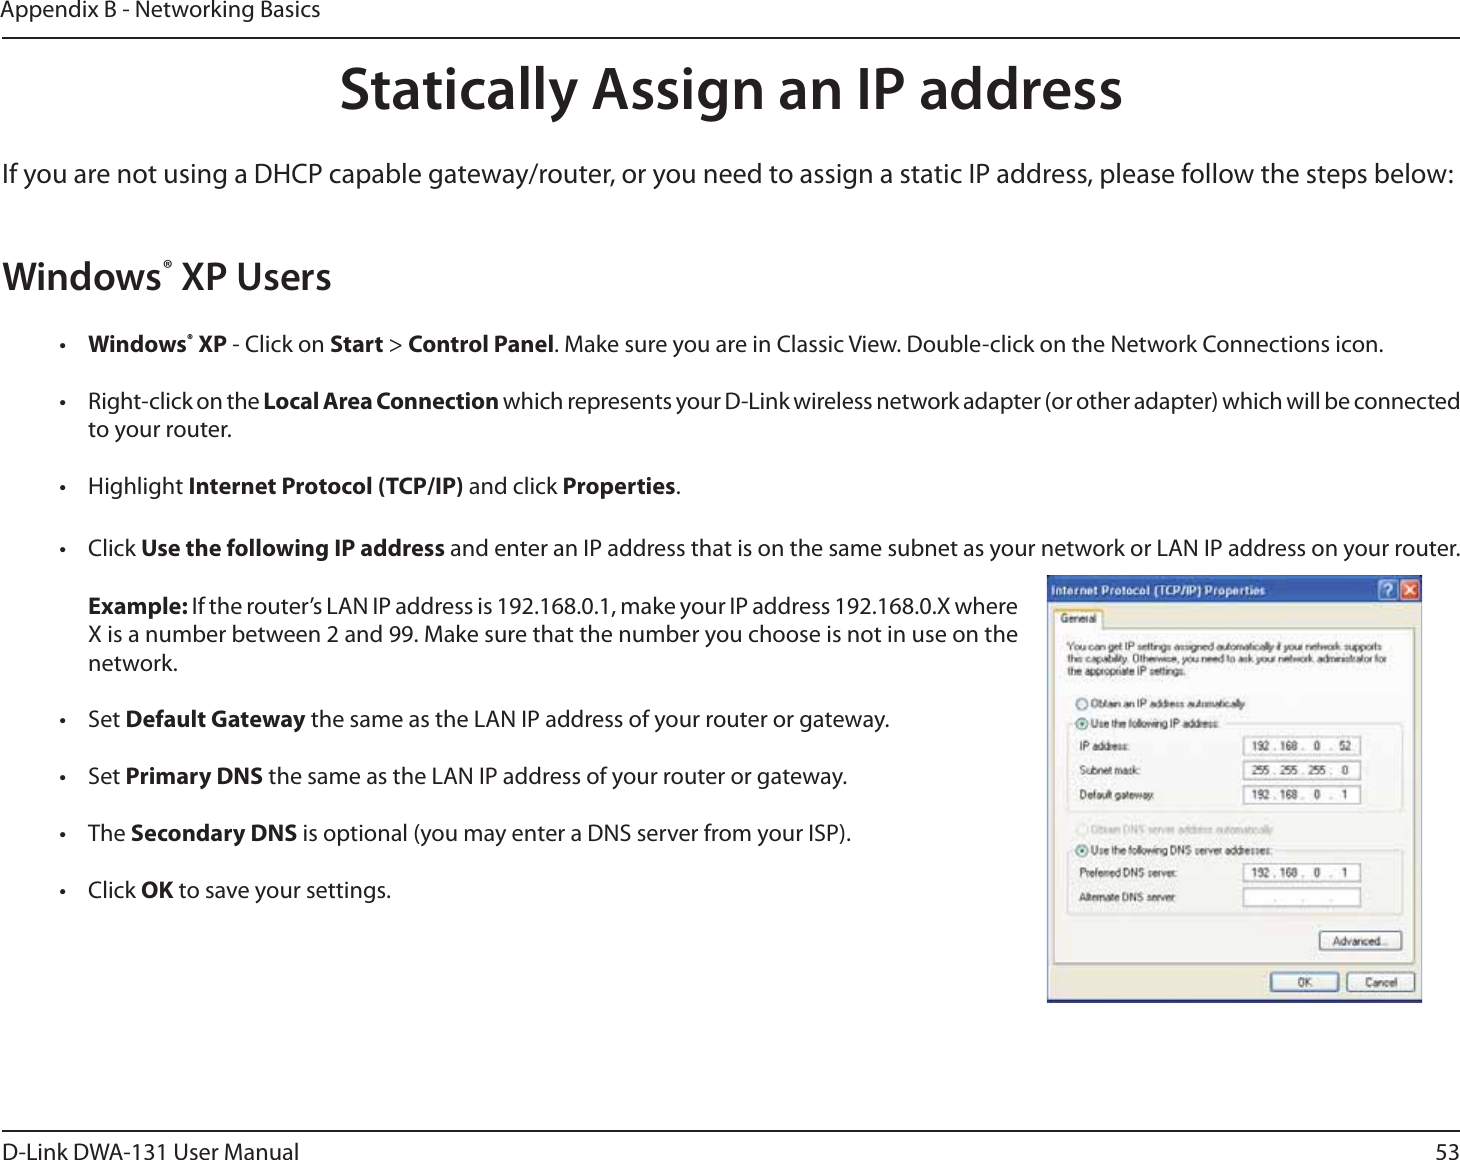 53D-Link DWA-131 User ManualAppendix B - Networking BasicsStatically Assign an IP addressIf you are not using a DHCP capable gateway/router, or you need to assign a static IP address, please follow the steps below:Windows® XP Users•  Windows® XP - Click on Start &gt; Control Panel. Make sure you are in Classic View. Double-click on the Network Connections icon.•  Right-click on the Local Area Connection which represents your D-Link wireless network adapter (or other adapter) which will be connected to your router.• Highlight Internet Protocol (TCP/IP) and click Properties.• Click Use the following IP address and enter an IP address that is on the same subnet as your network or LAN IP address on your router. Example: If the router’s LAN IP address is 192.168.0.1, make your IP address 192.168.0.X where X is a number between 2 and 99. Make sure that the number you choose is not in use on the network. • Set Default Gateway the same as the LAN IP address of your router or gateway.• Set Primary DNS the same as the LAN IP address of your router or gateway. • The Secondary DNS is optional (you may enter a DNS server from your ISP).• Click OK to save your settings.